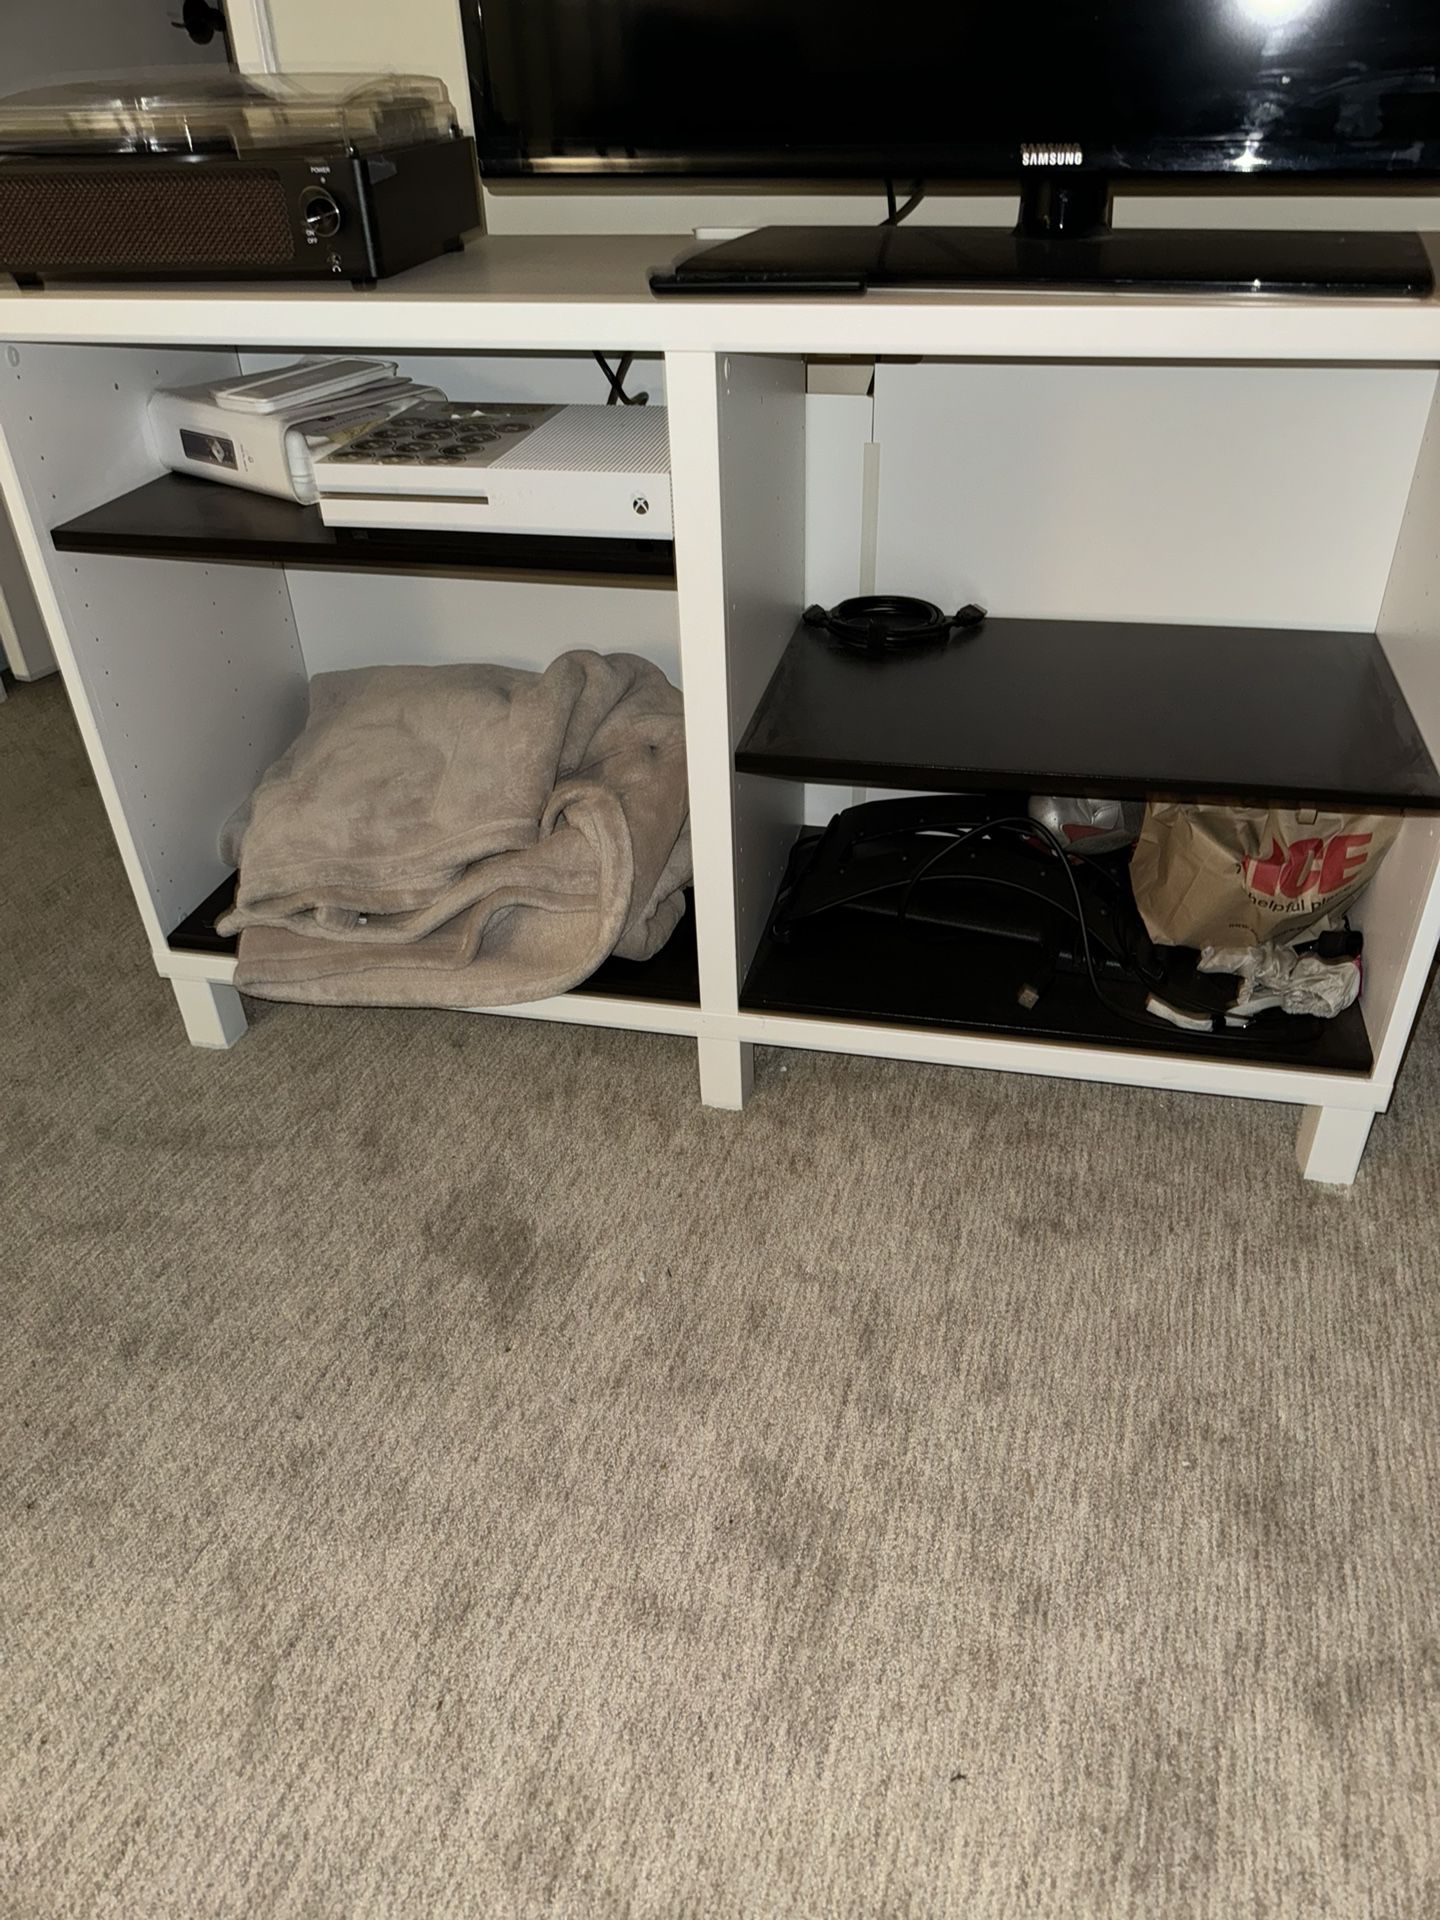 BARELY USED TV SHELVING UNIT